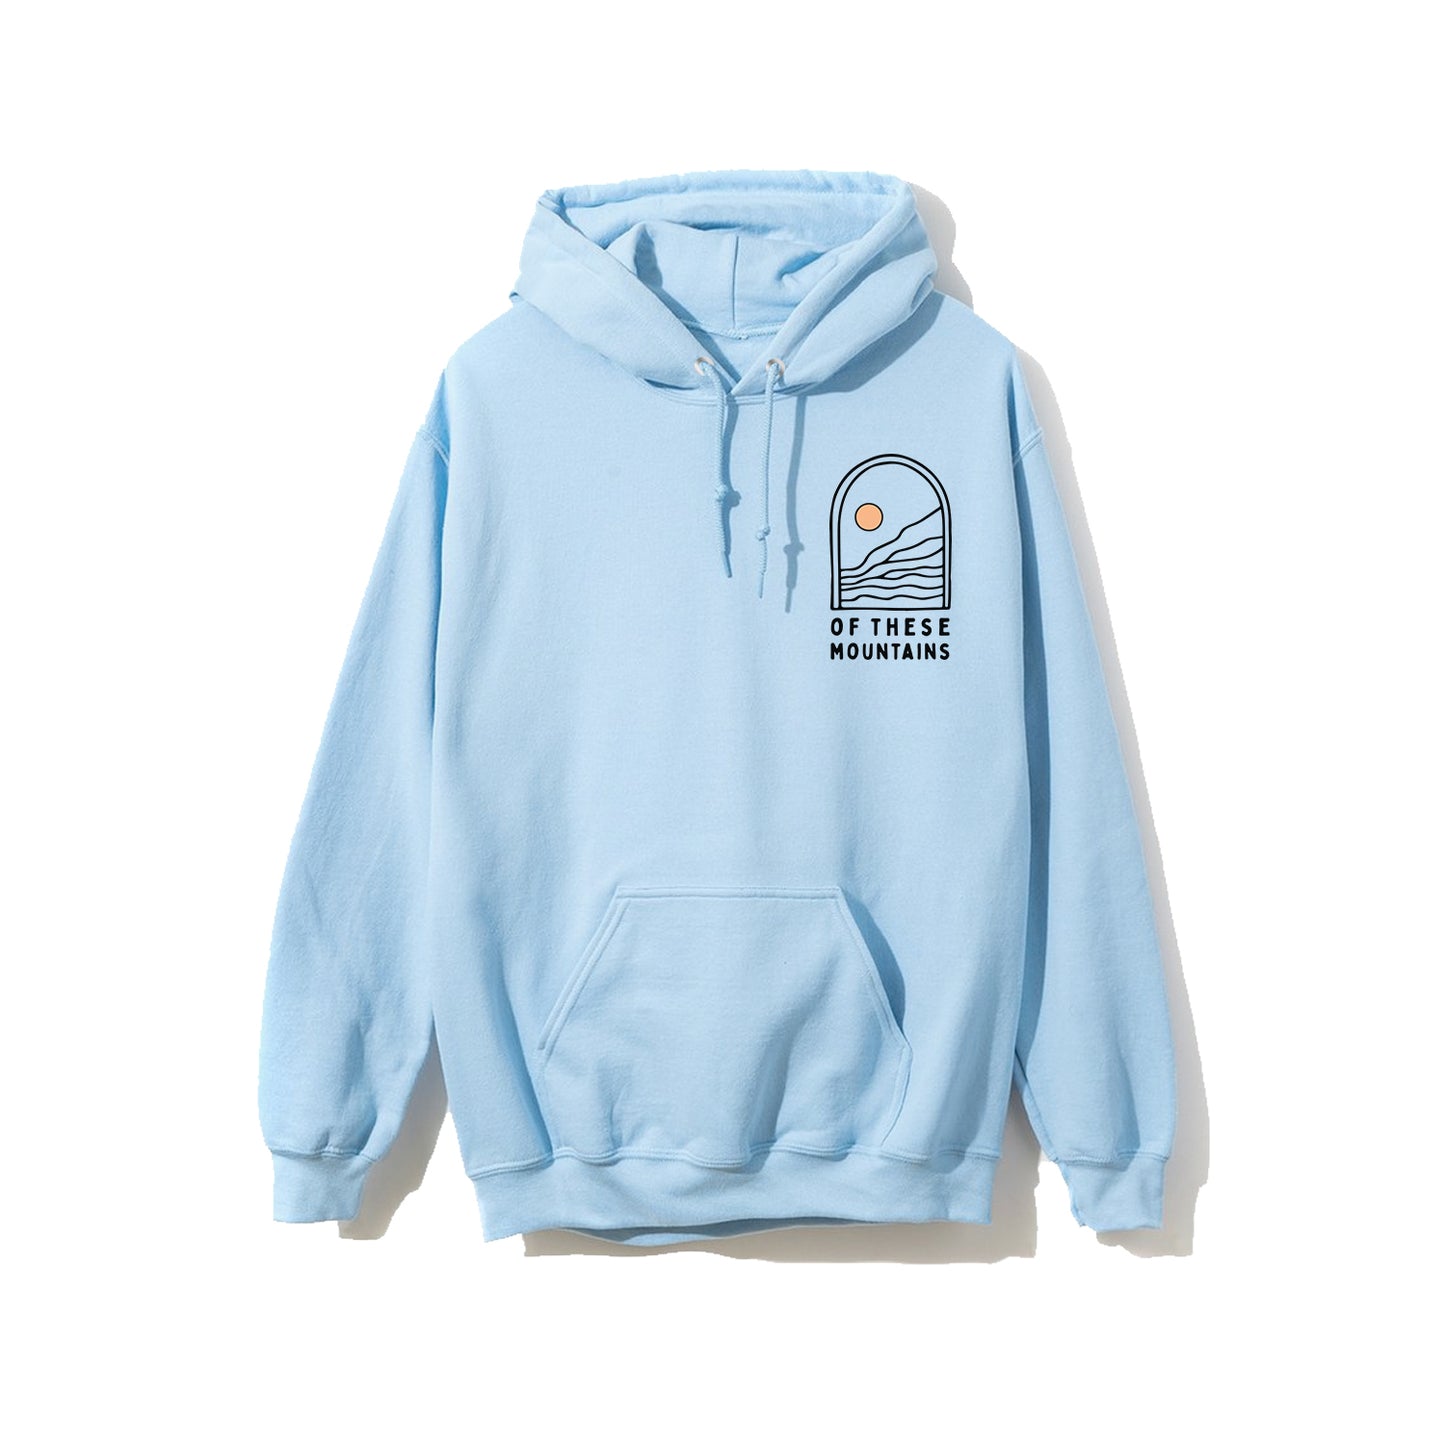 Of These Mountains Stay Golden Graphic Hoodie